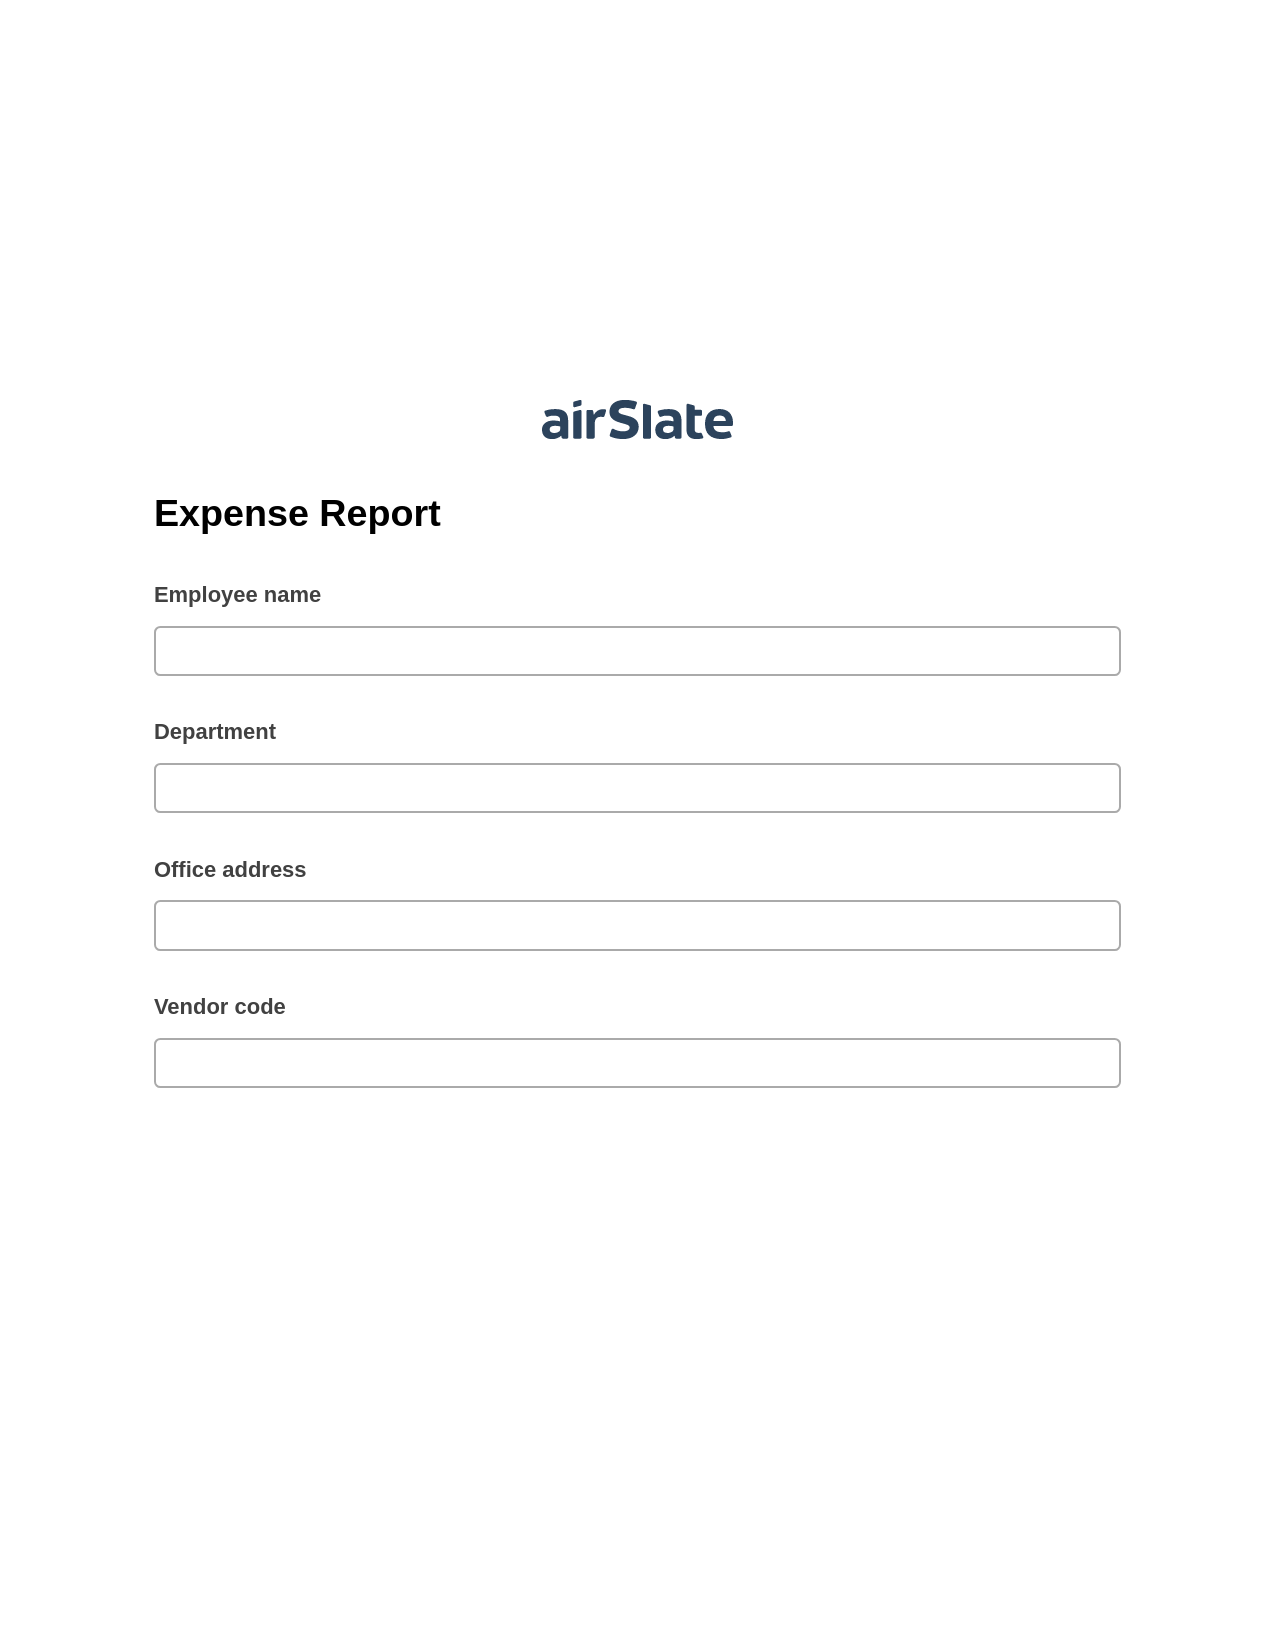 Expense Report Pre-fill Dropdown from Airtable, Add Tags to Slate Bot, Export to Excel 365 Bot